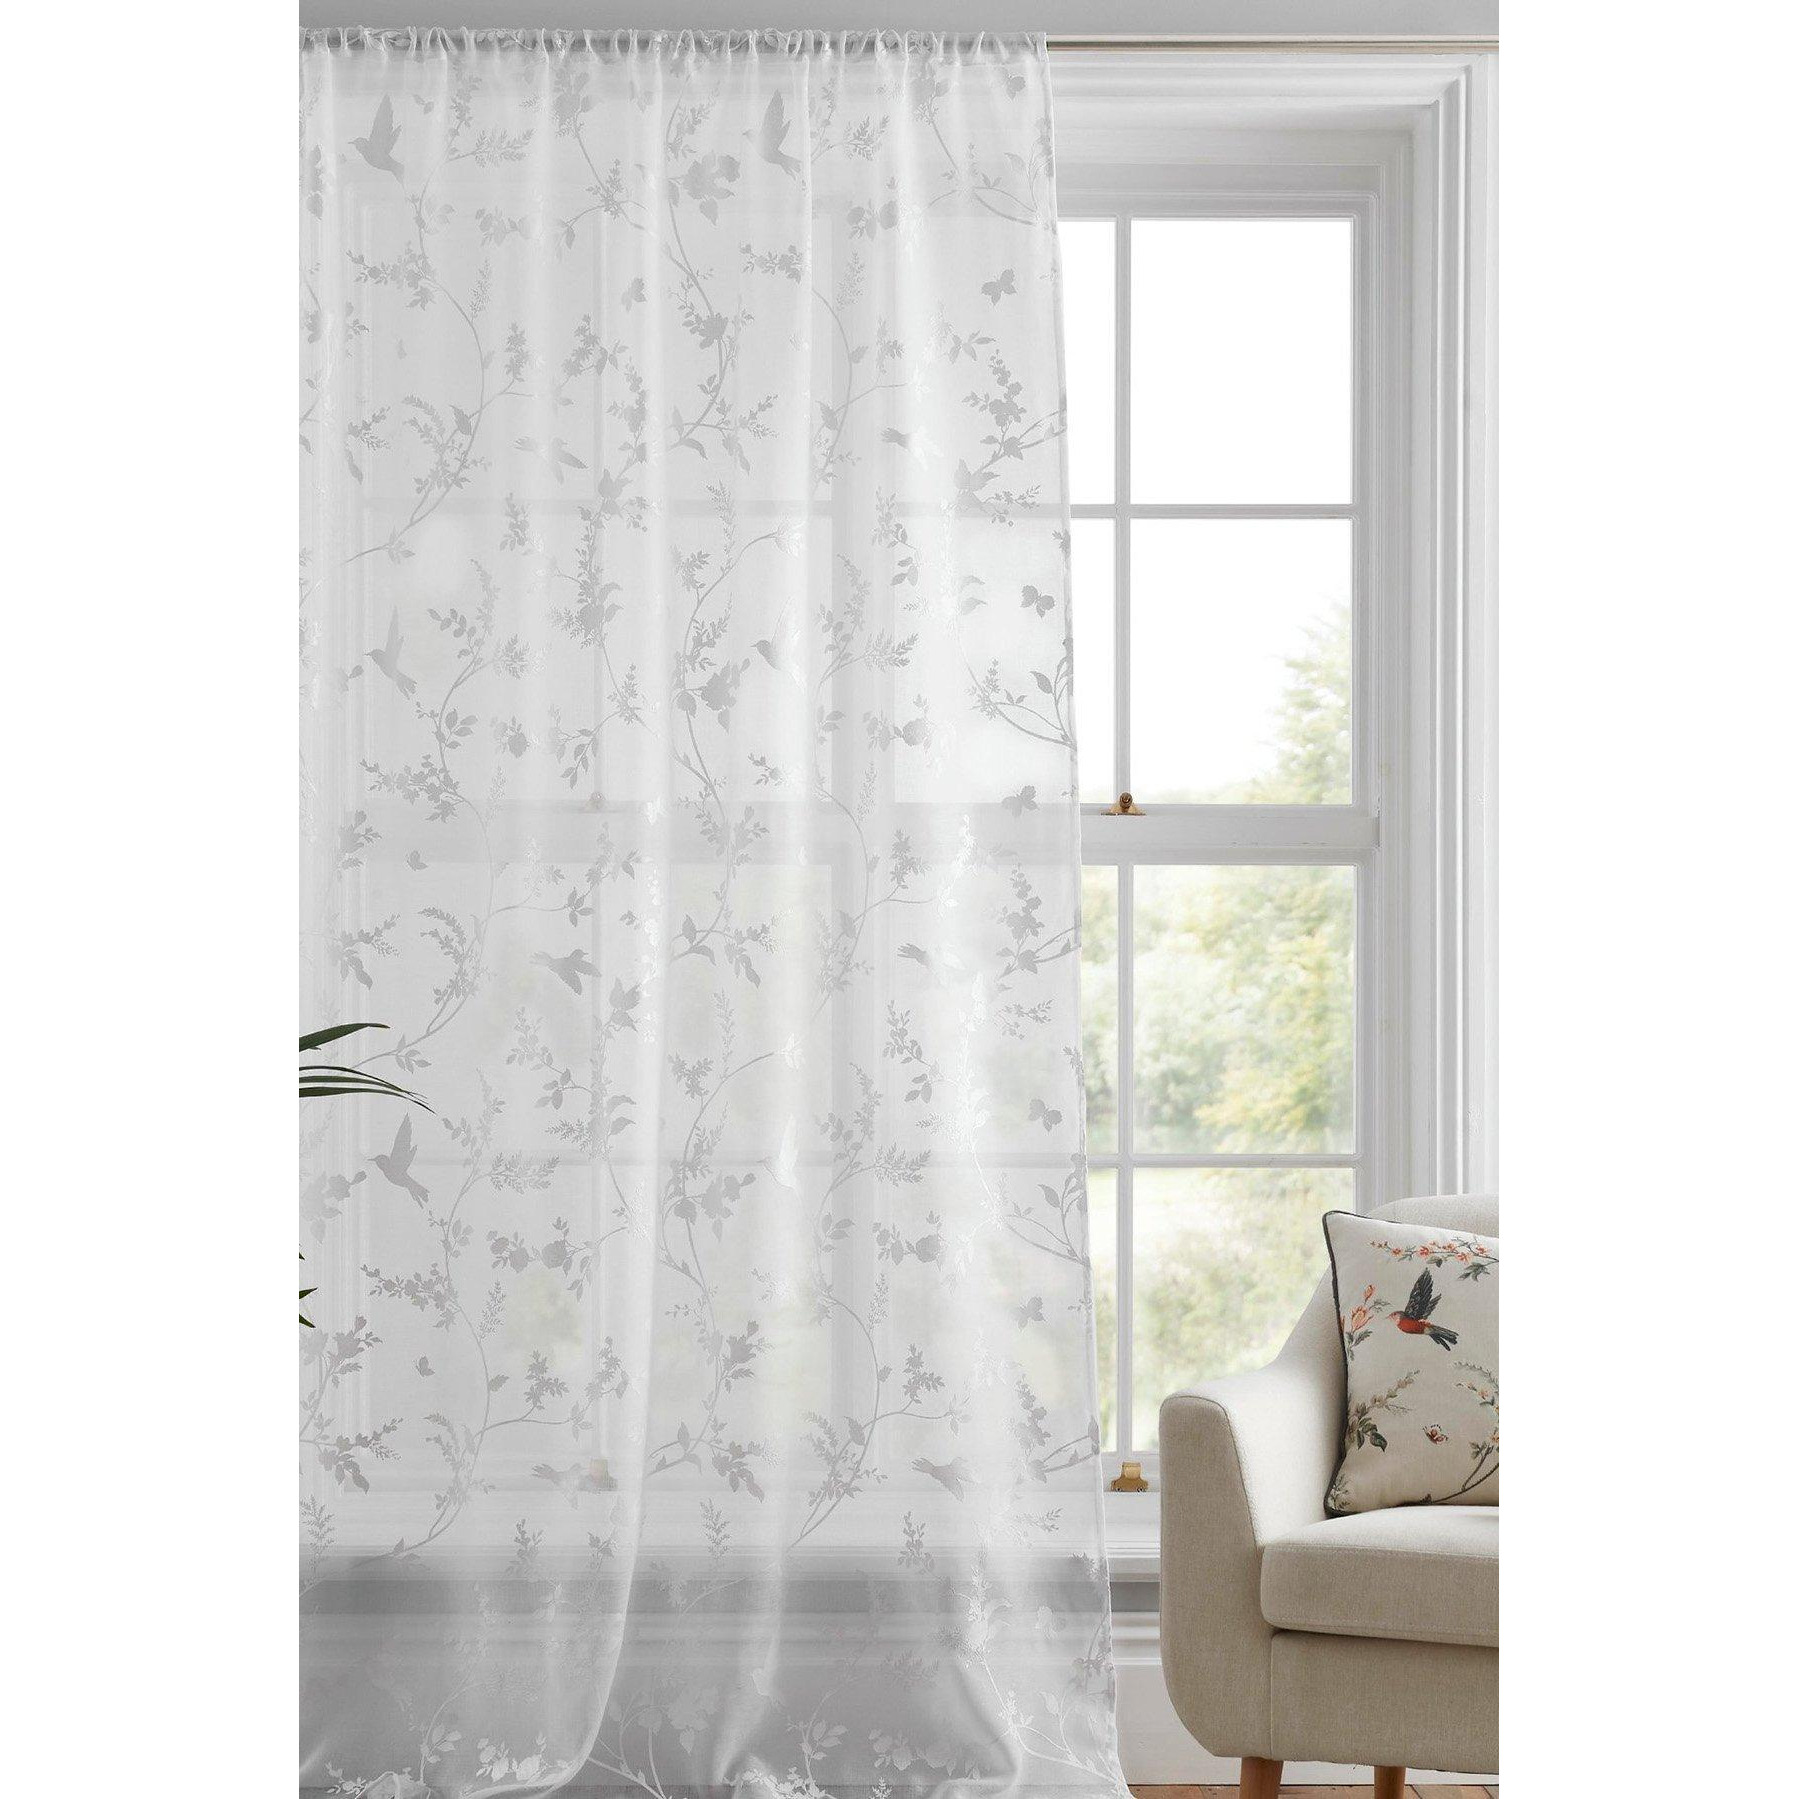 'Darnley' Floral & Bird Print Voile Panel - image 1